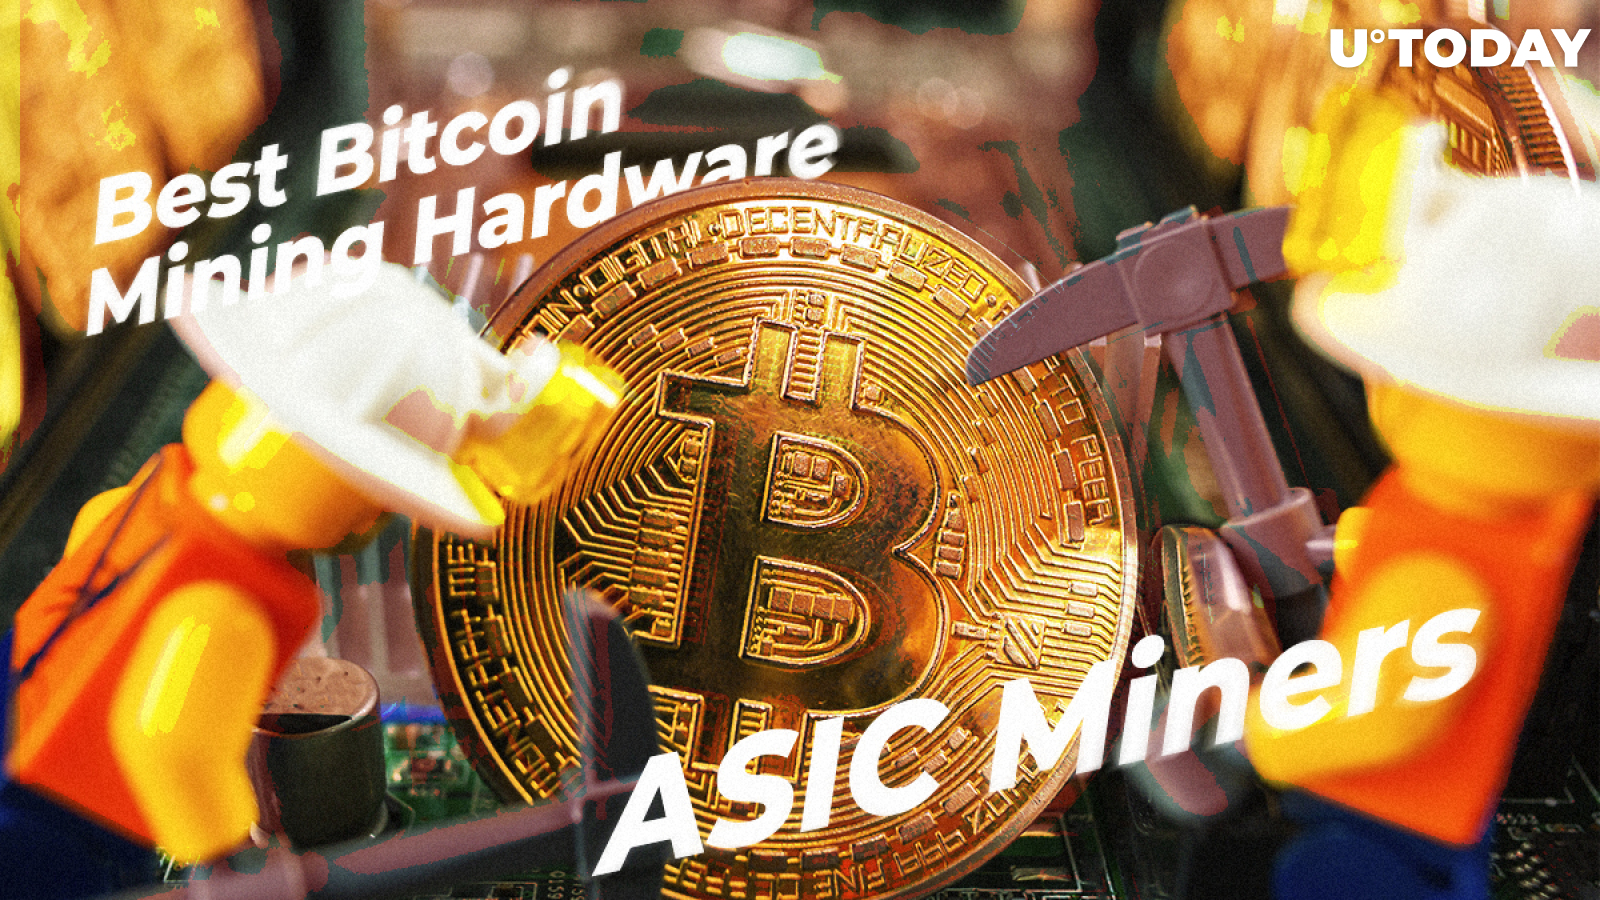 Best Bitcoin Mining Hardware in 2019: Prepare For Super-Powerful ASIC Miners - Updated